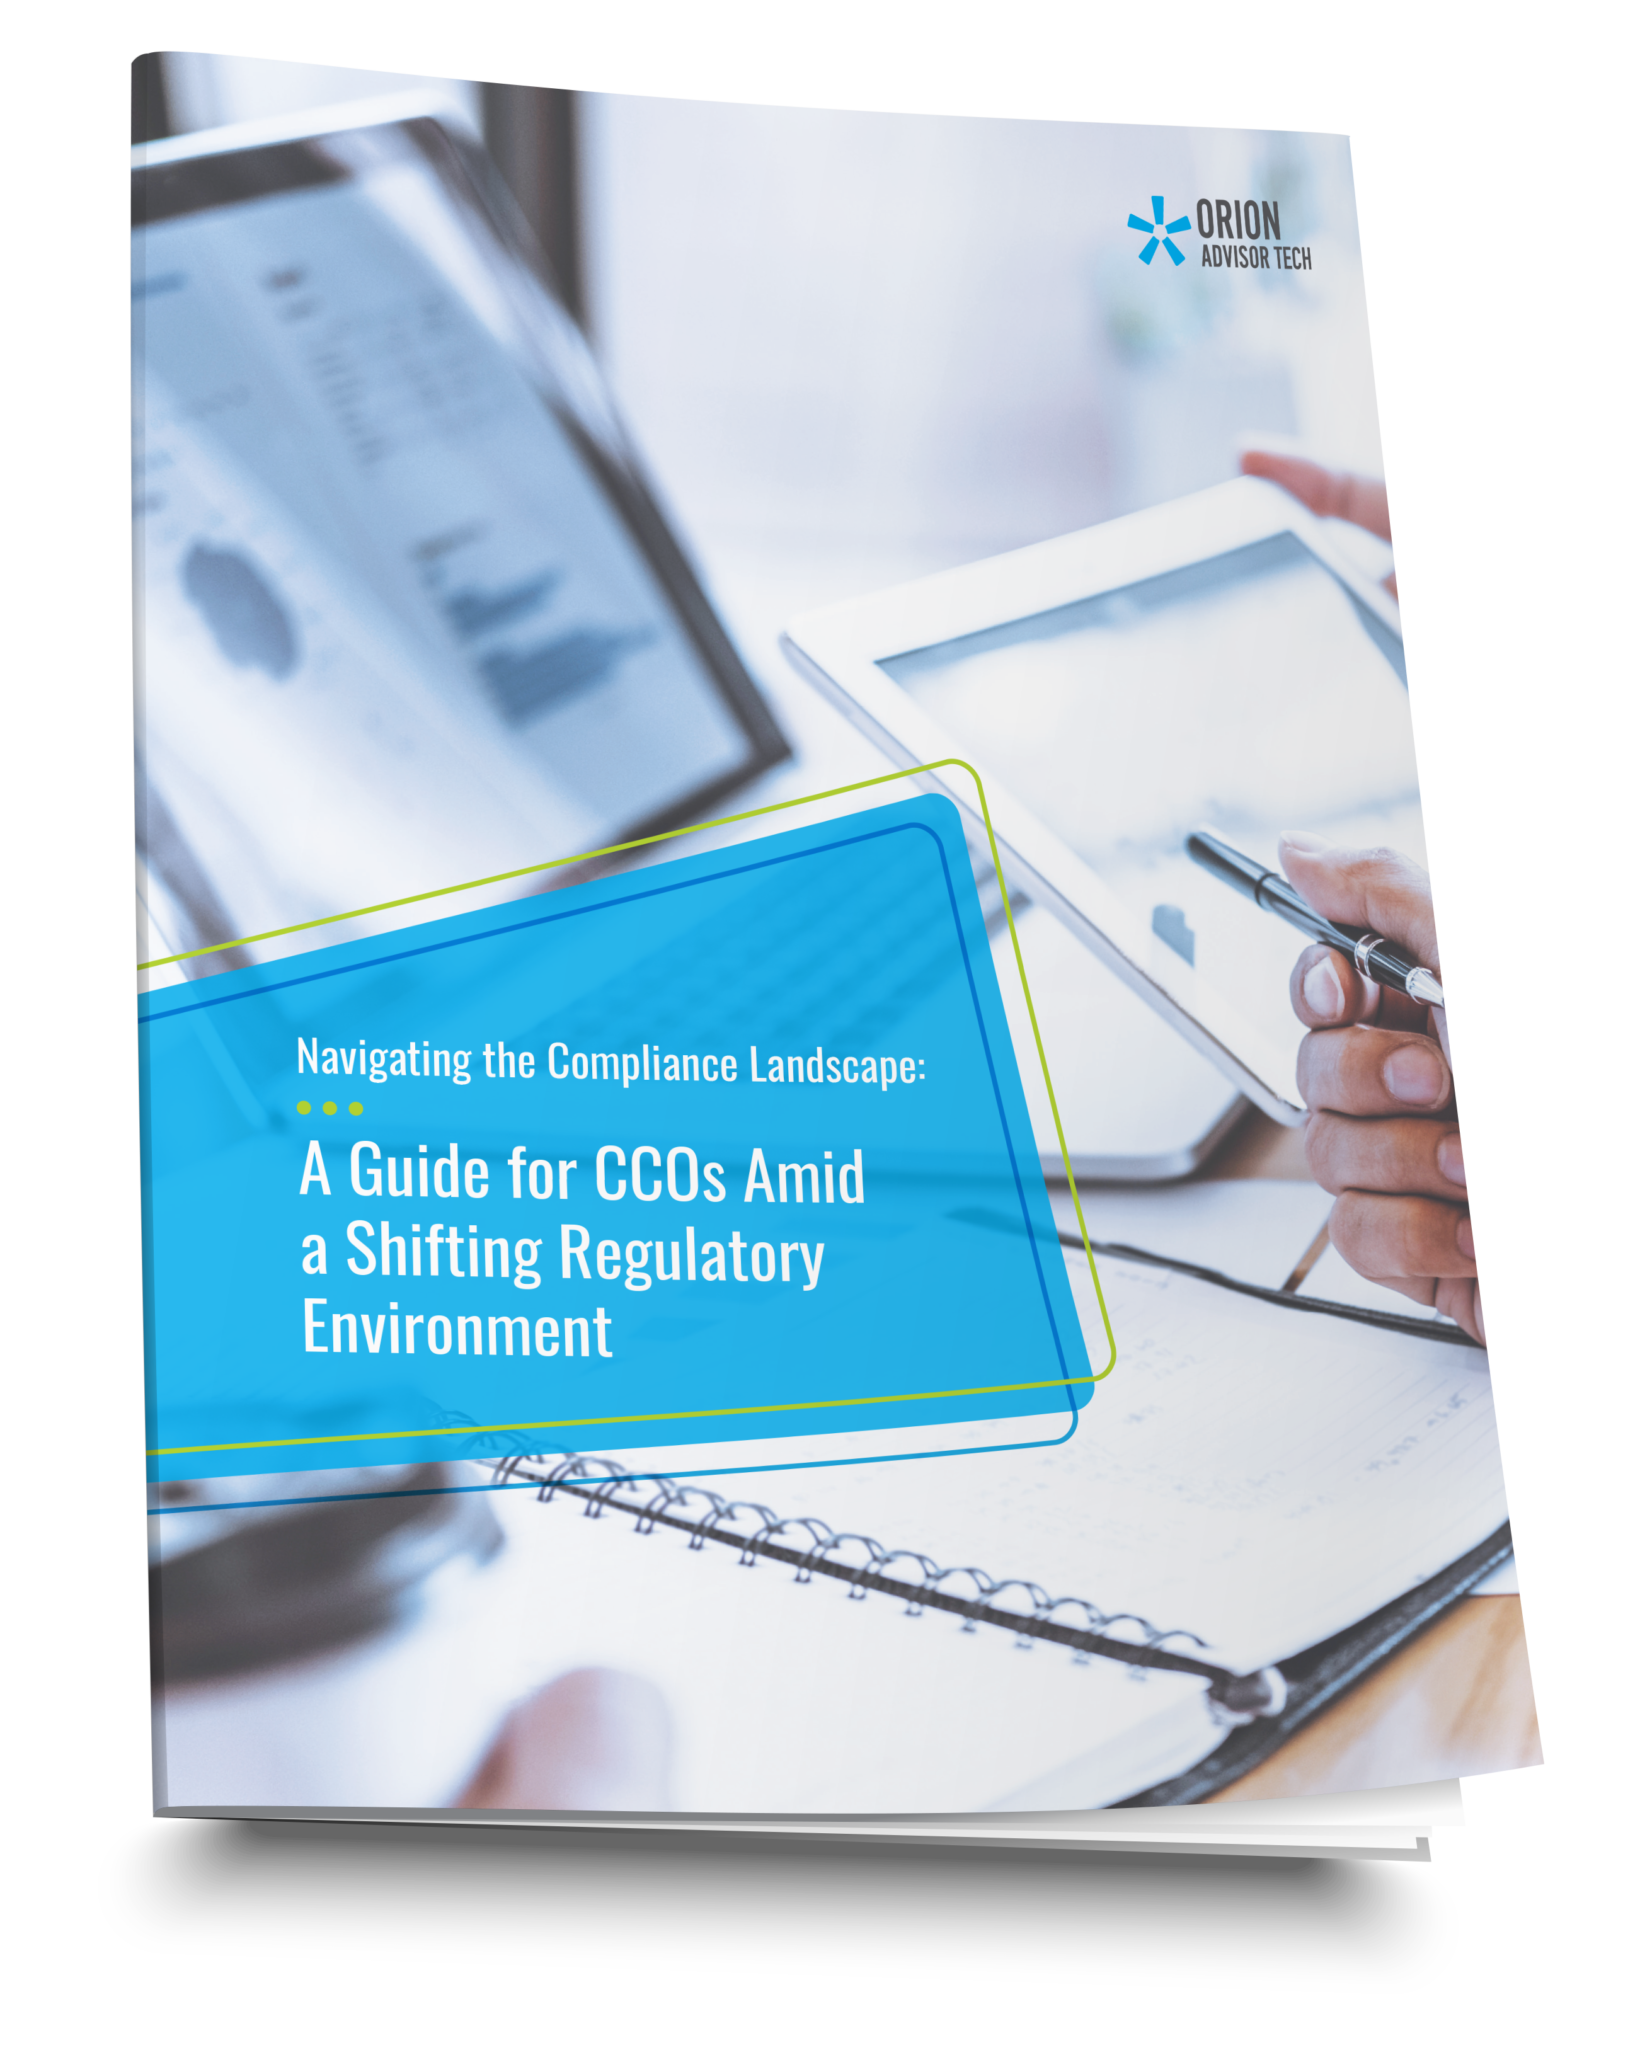 Navigating the Compliance Landscape book cover